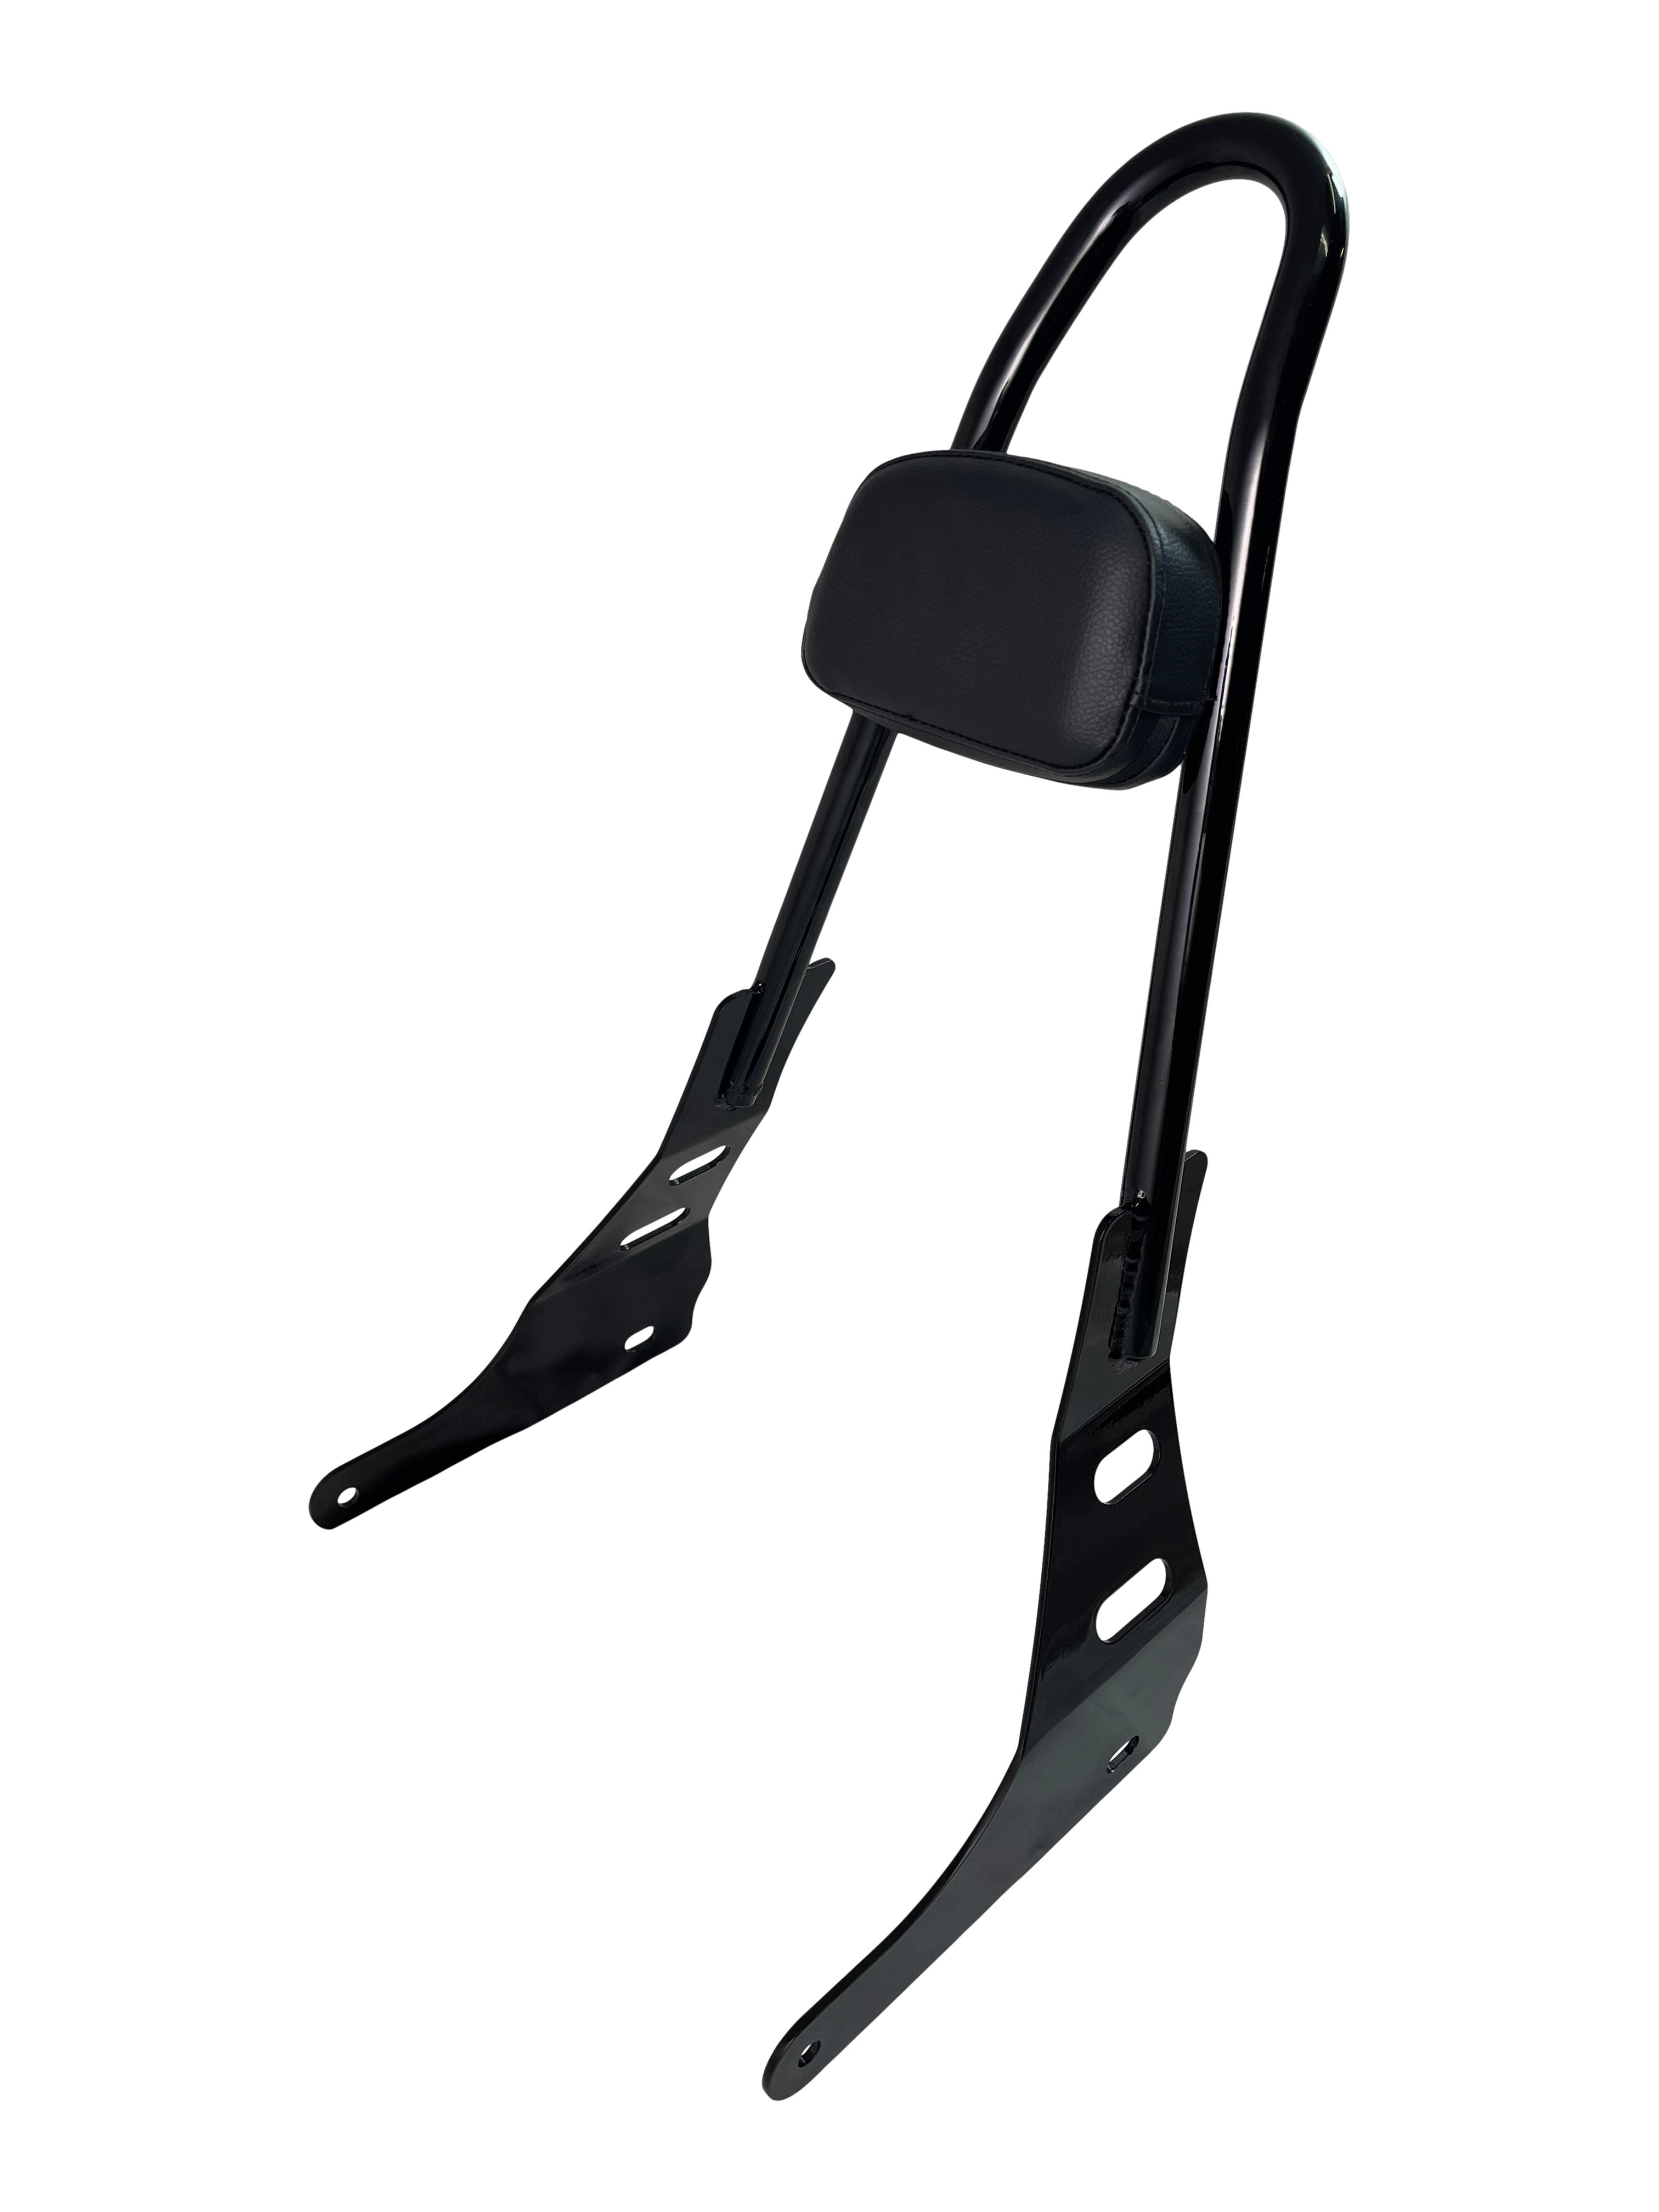 Nightster Tall Sissy bar with pad gloss black